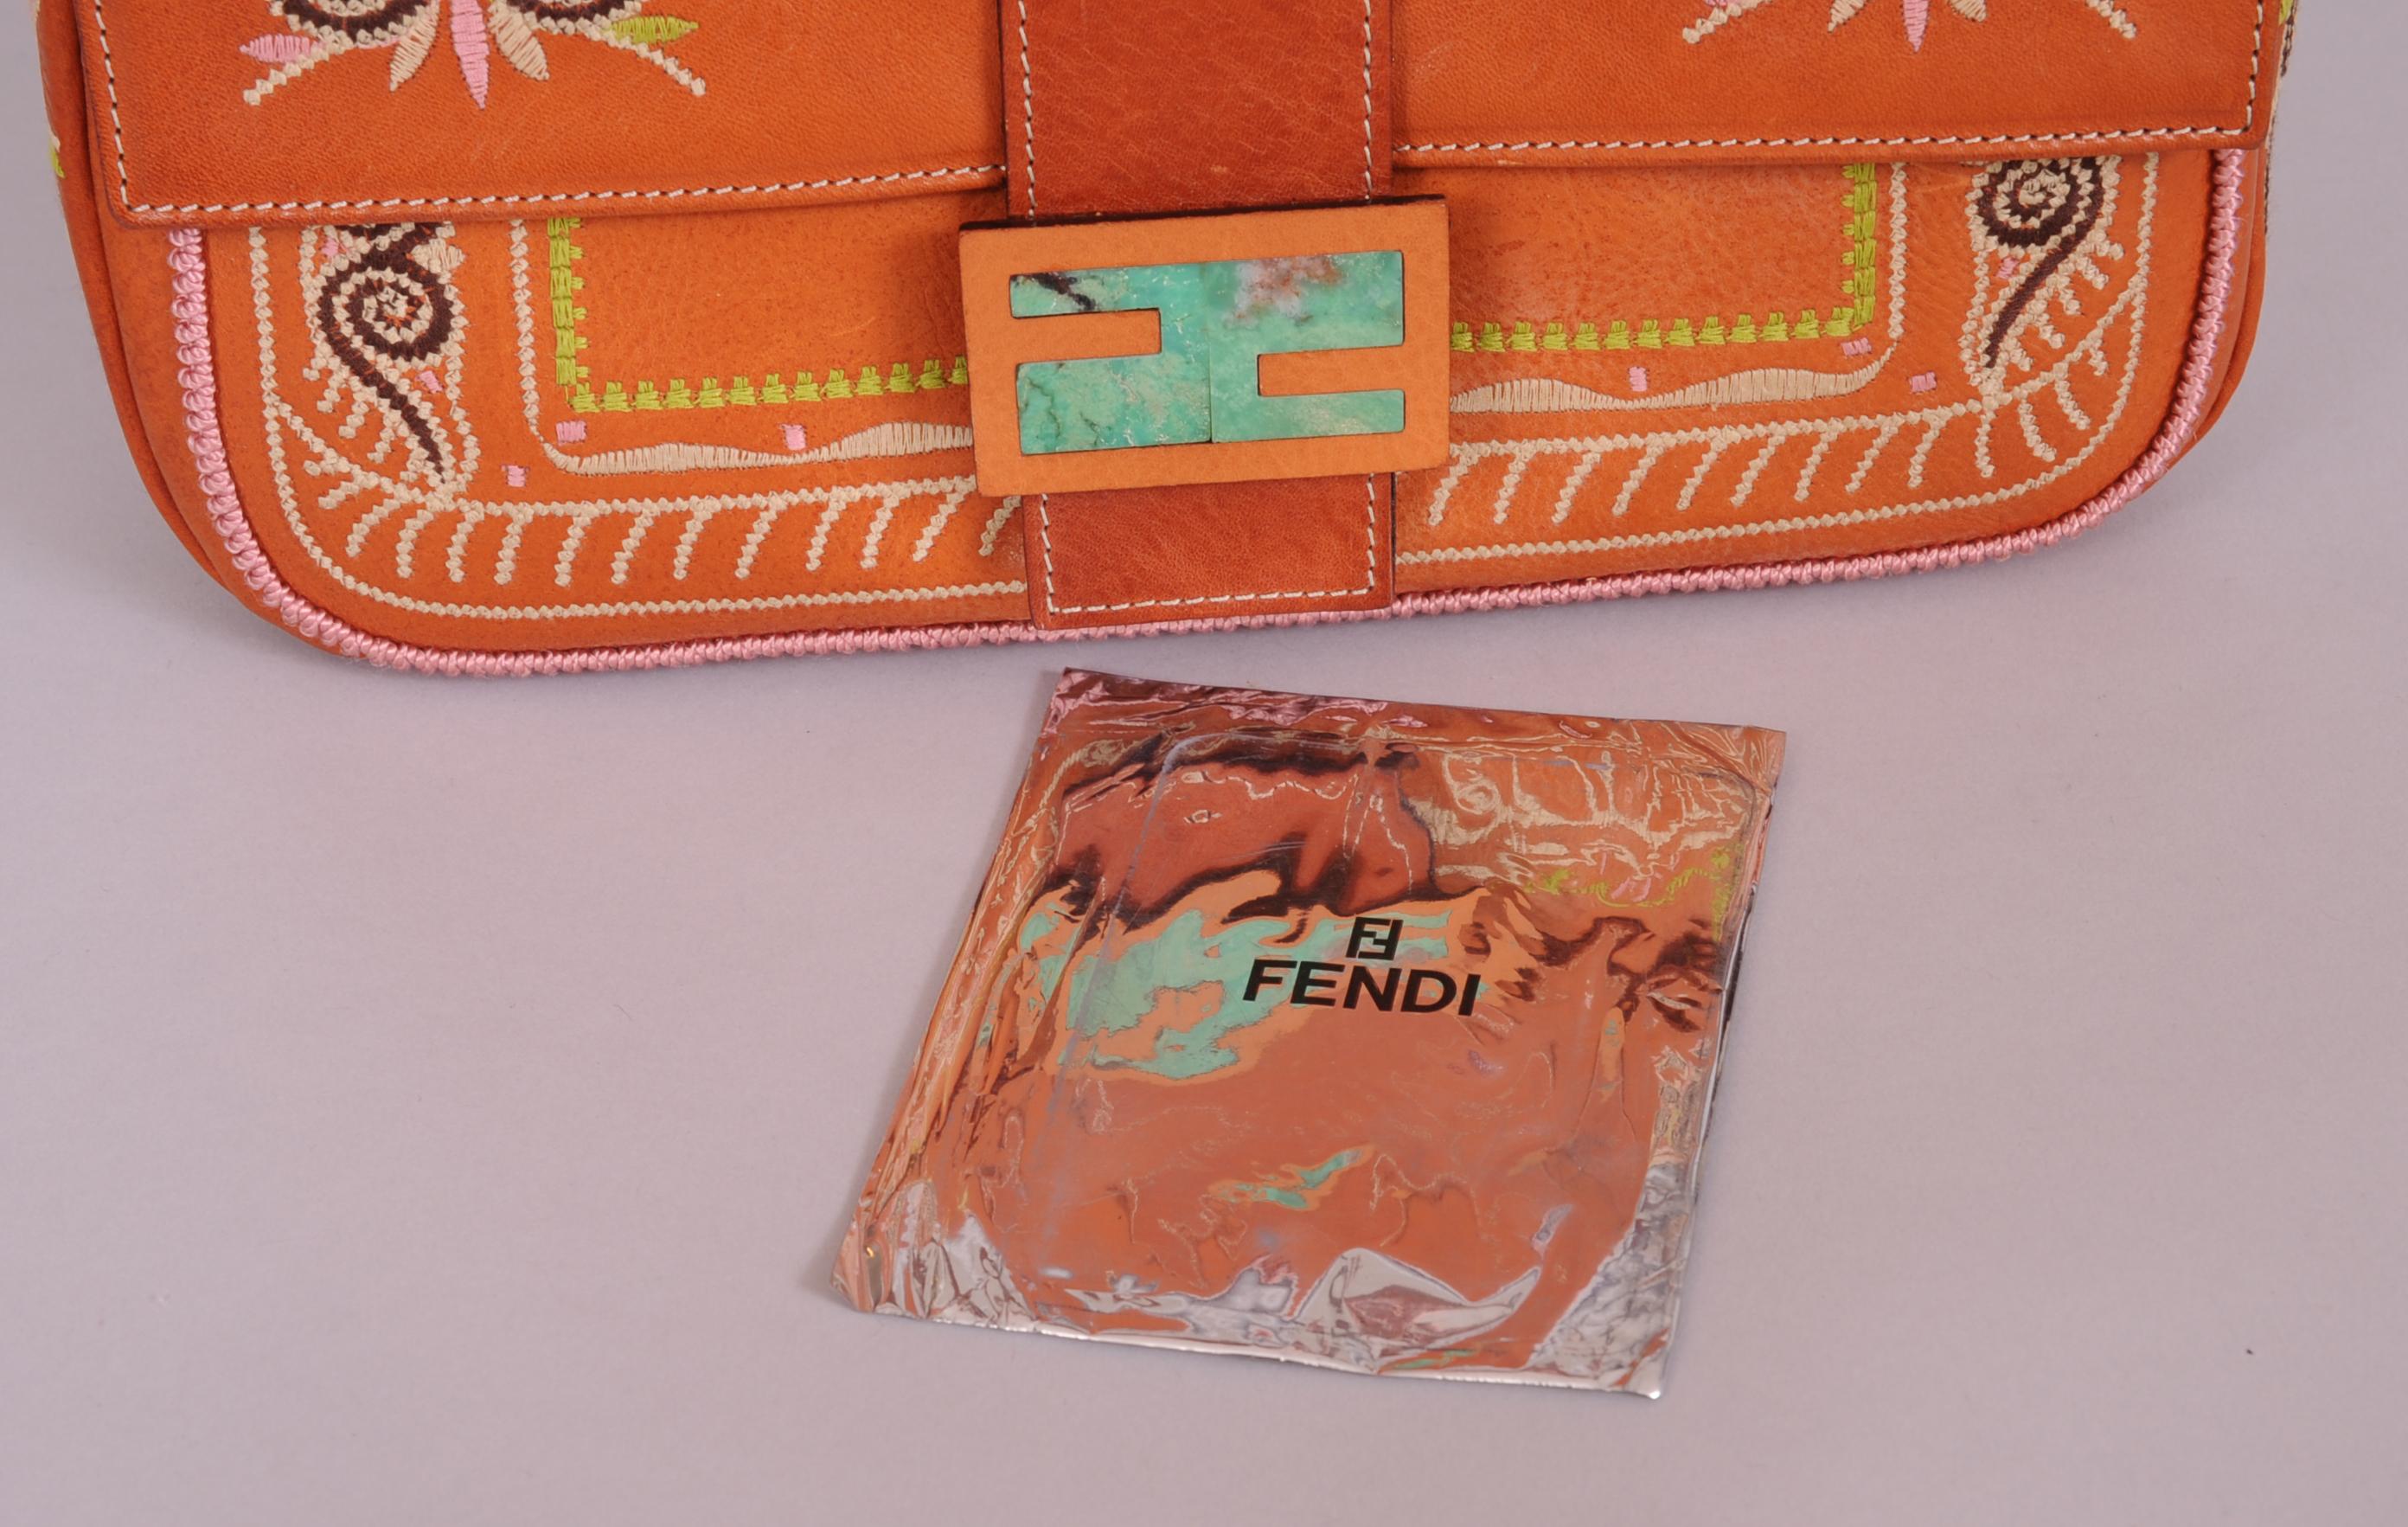 Fendi Baguette with Colorful Embroidery on Leather 2